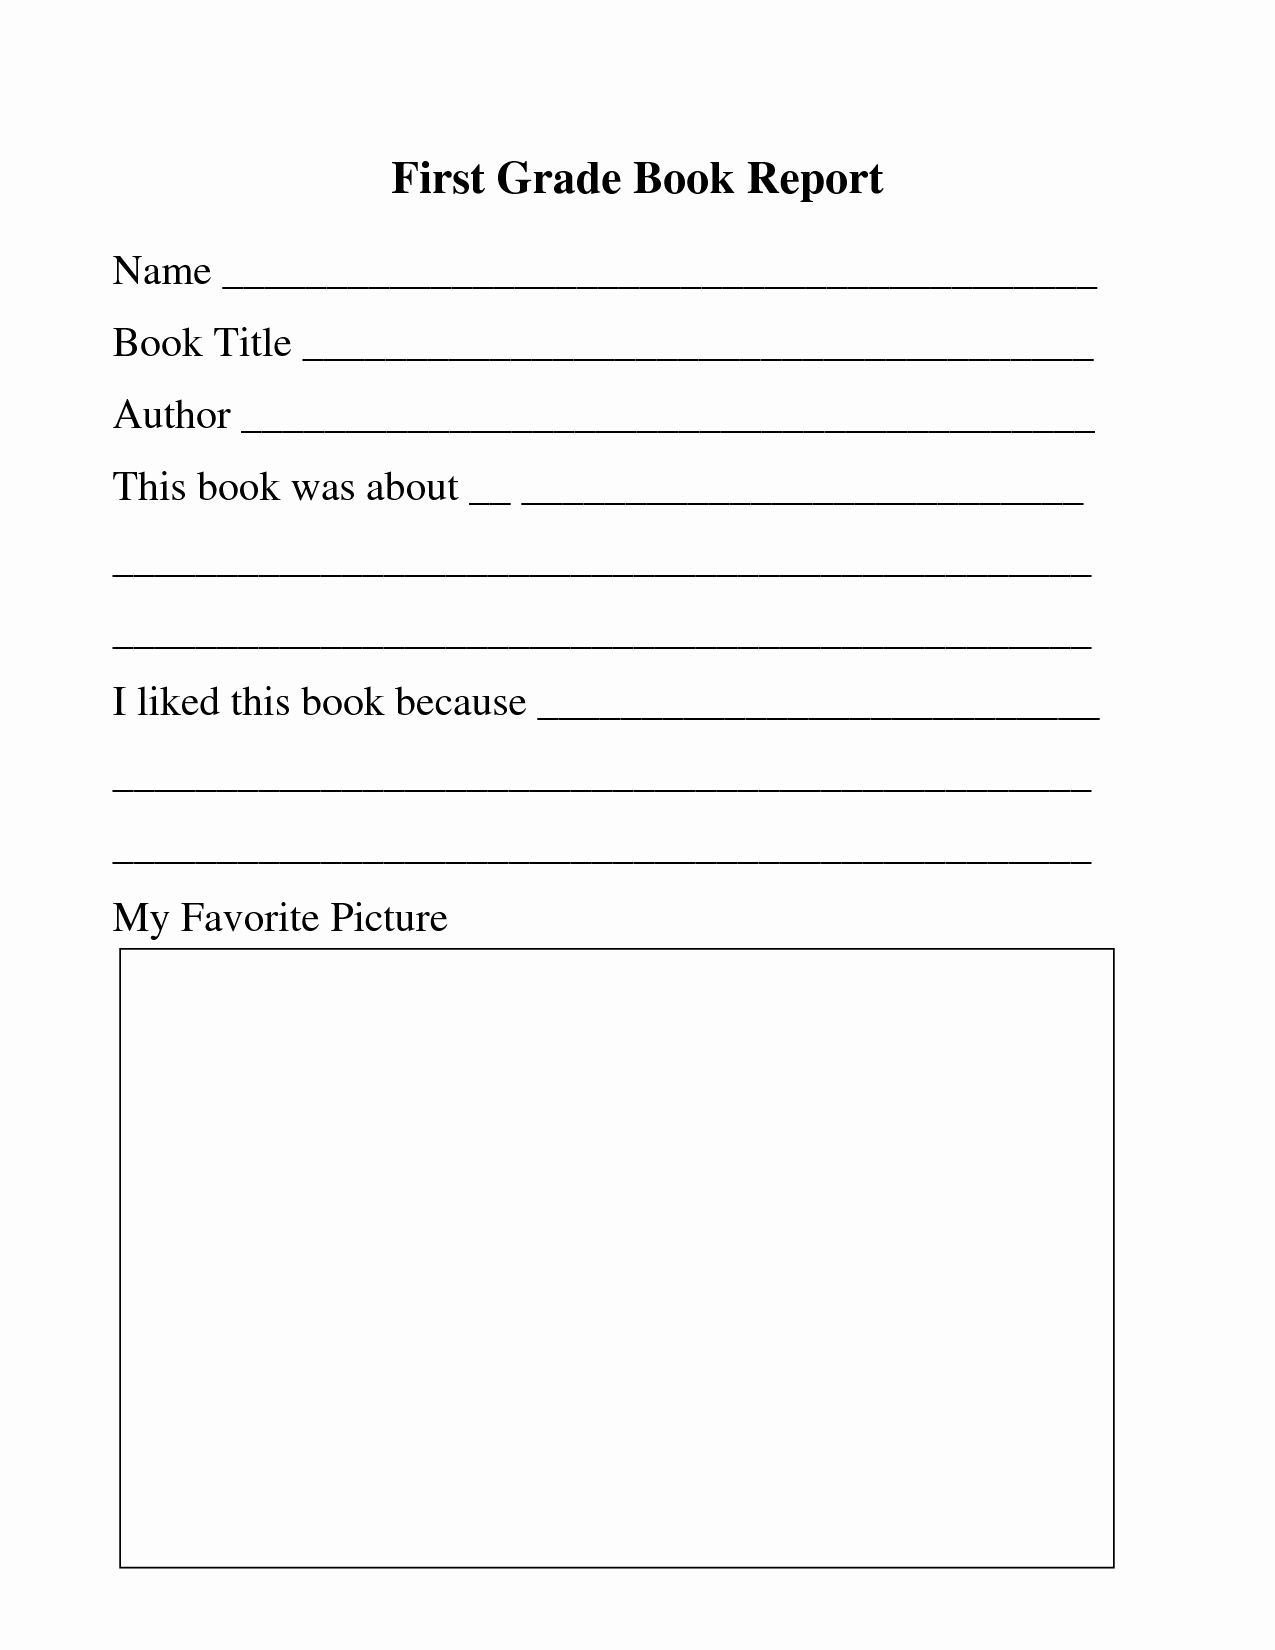 Printable Book Template Or First Grade Book Review Printable Throughout First Grade Book Report Template